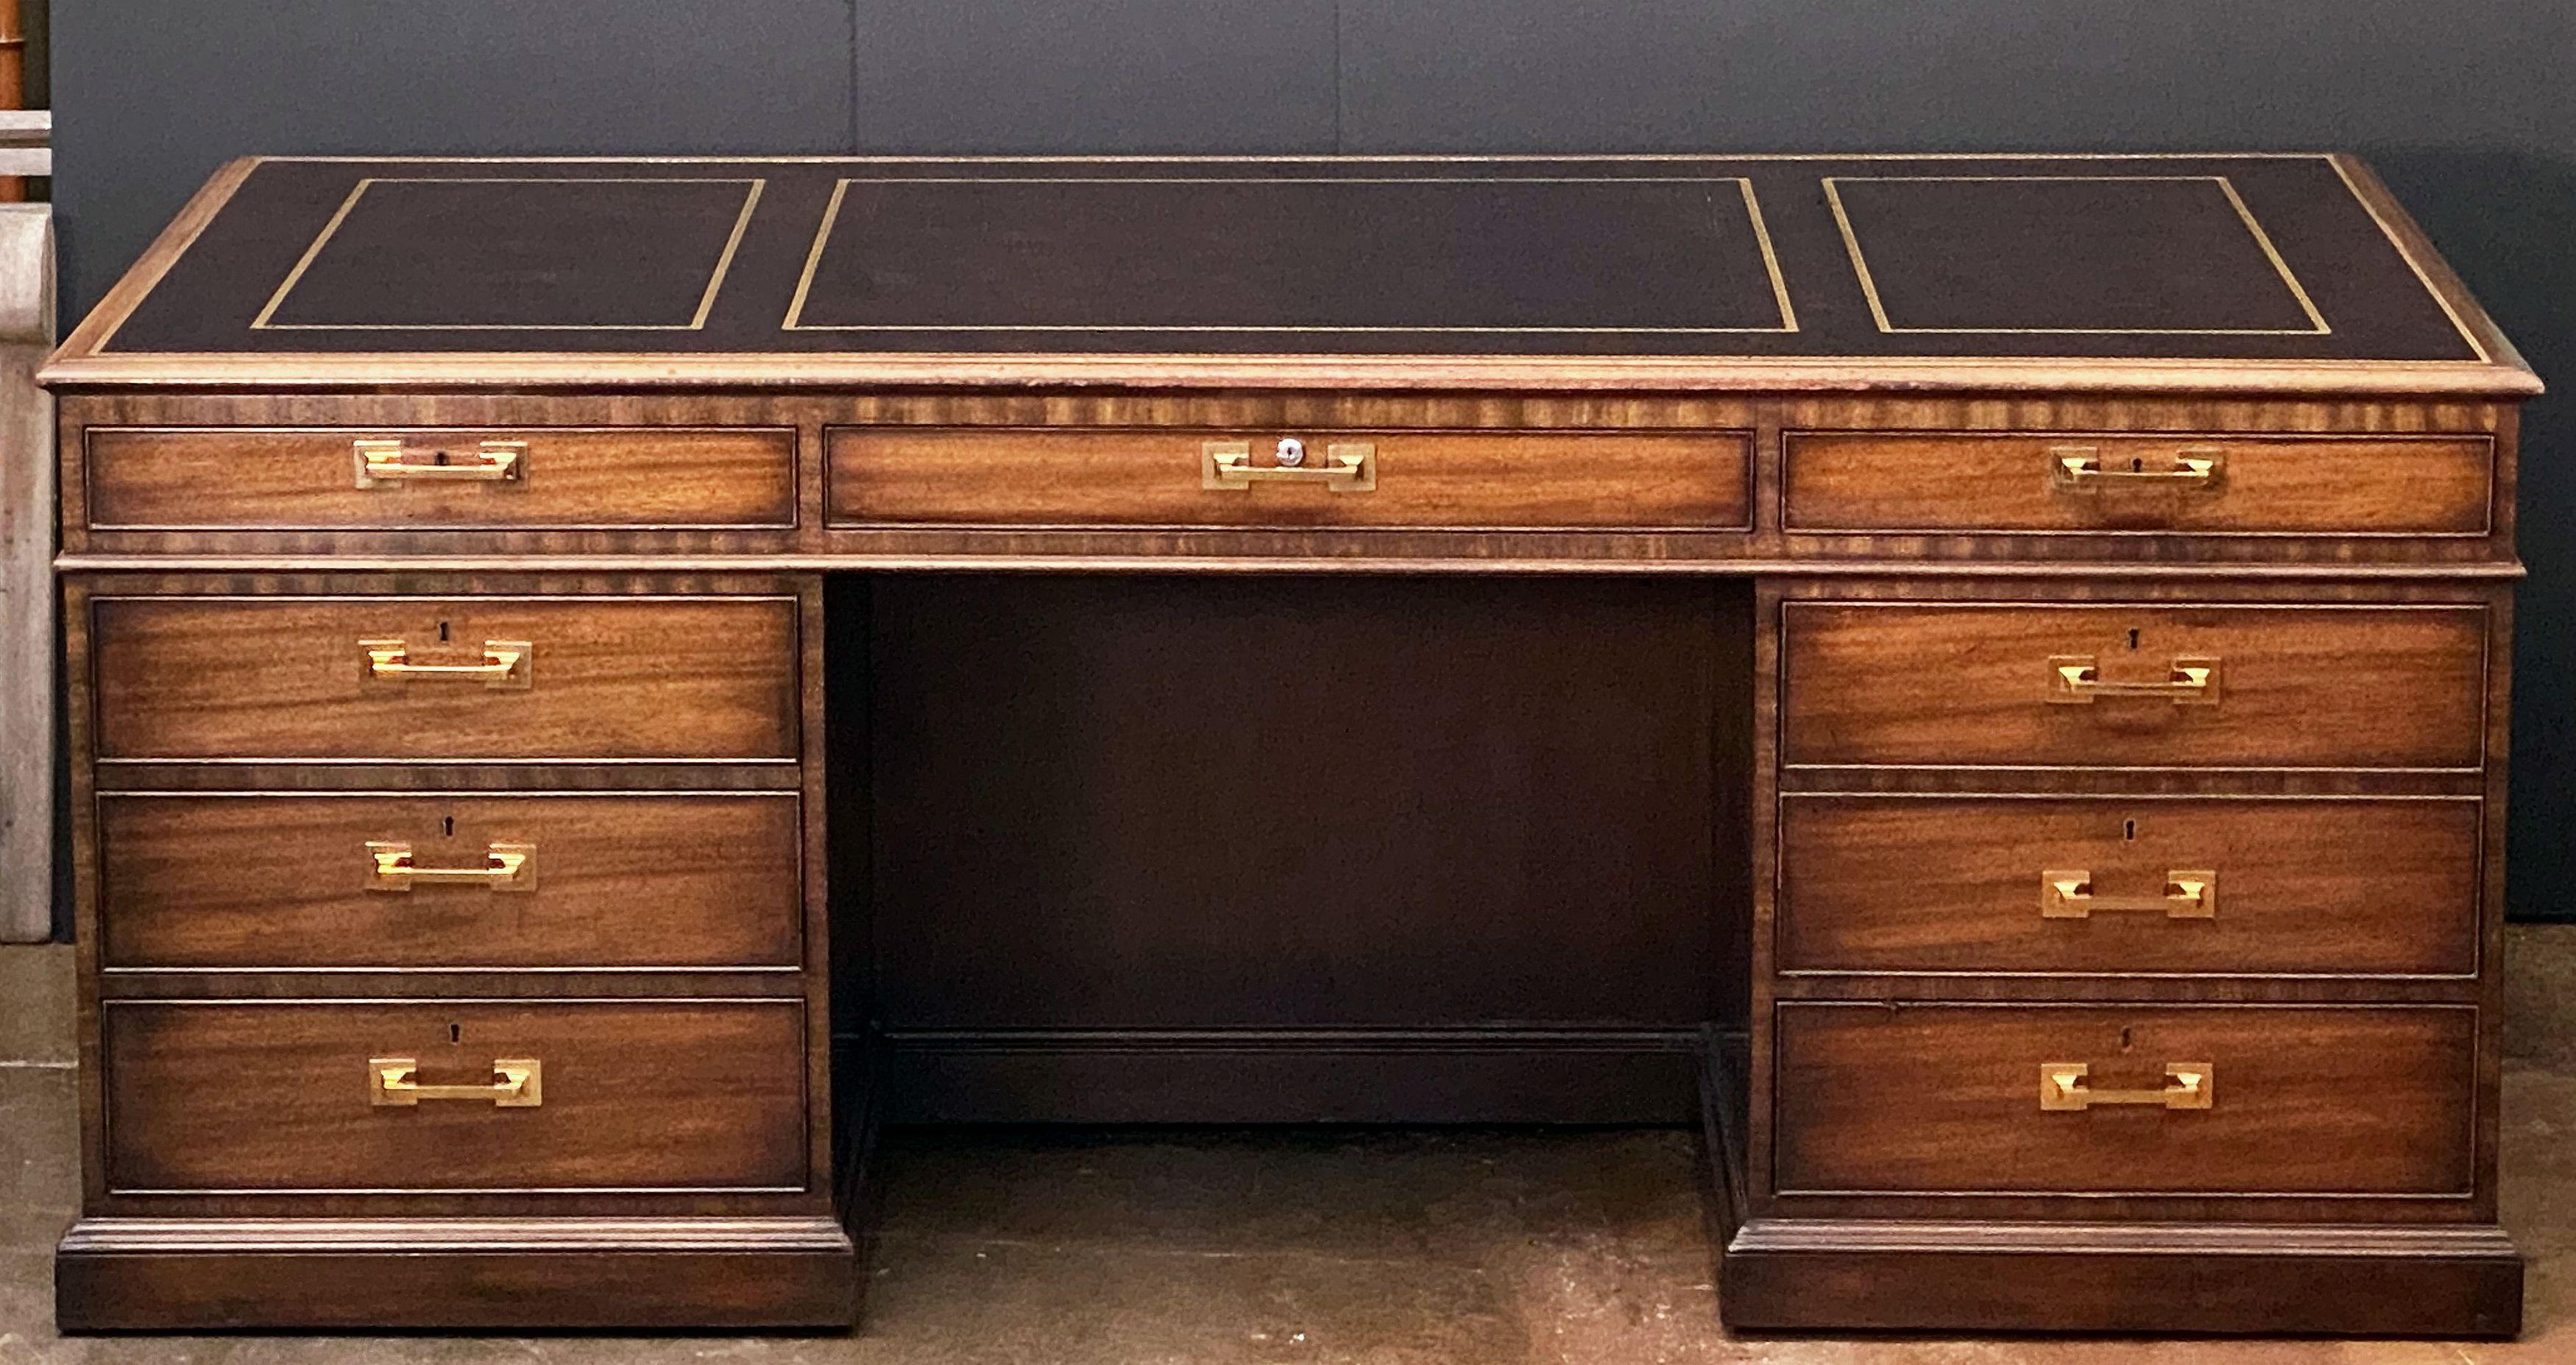 A fine large executive partners pedestal desk featuring an embossed leather top over a frieze of drawers and cabinet drawers, by Kittinger.
With metal Kittinger name plaque in drawer.

Dimensions: H 32 inches x W 79 inches x D 42 1/4 inches.